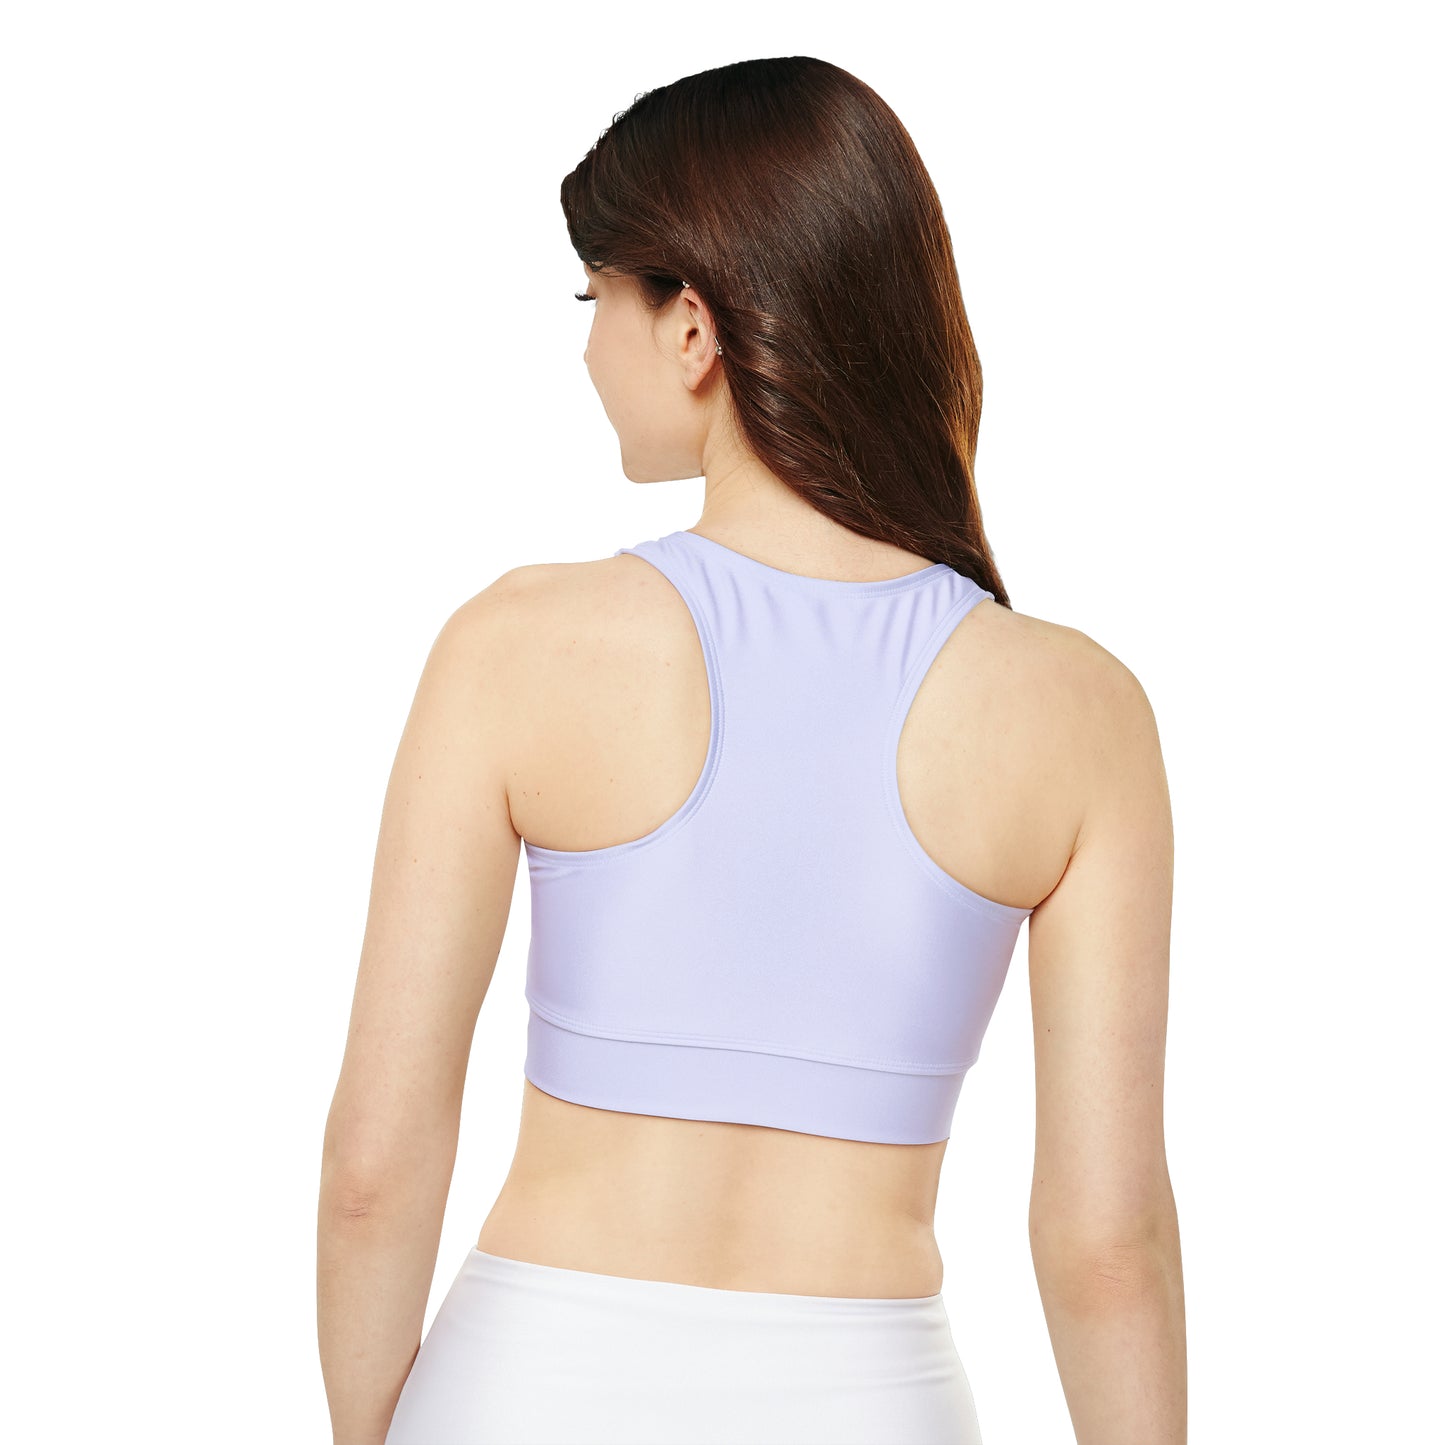 Lavender Fully Lined, Padded Sports Bra